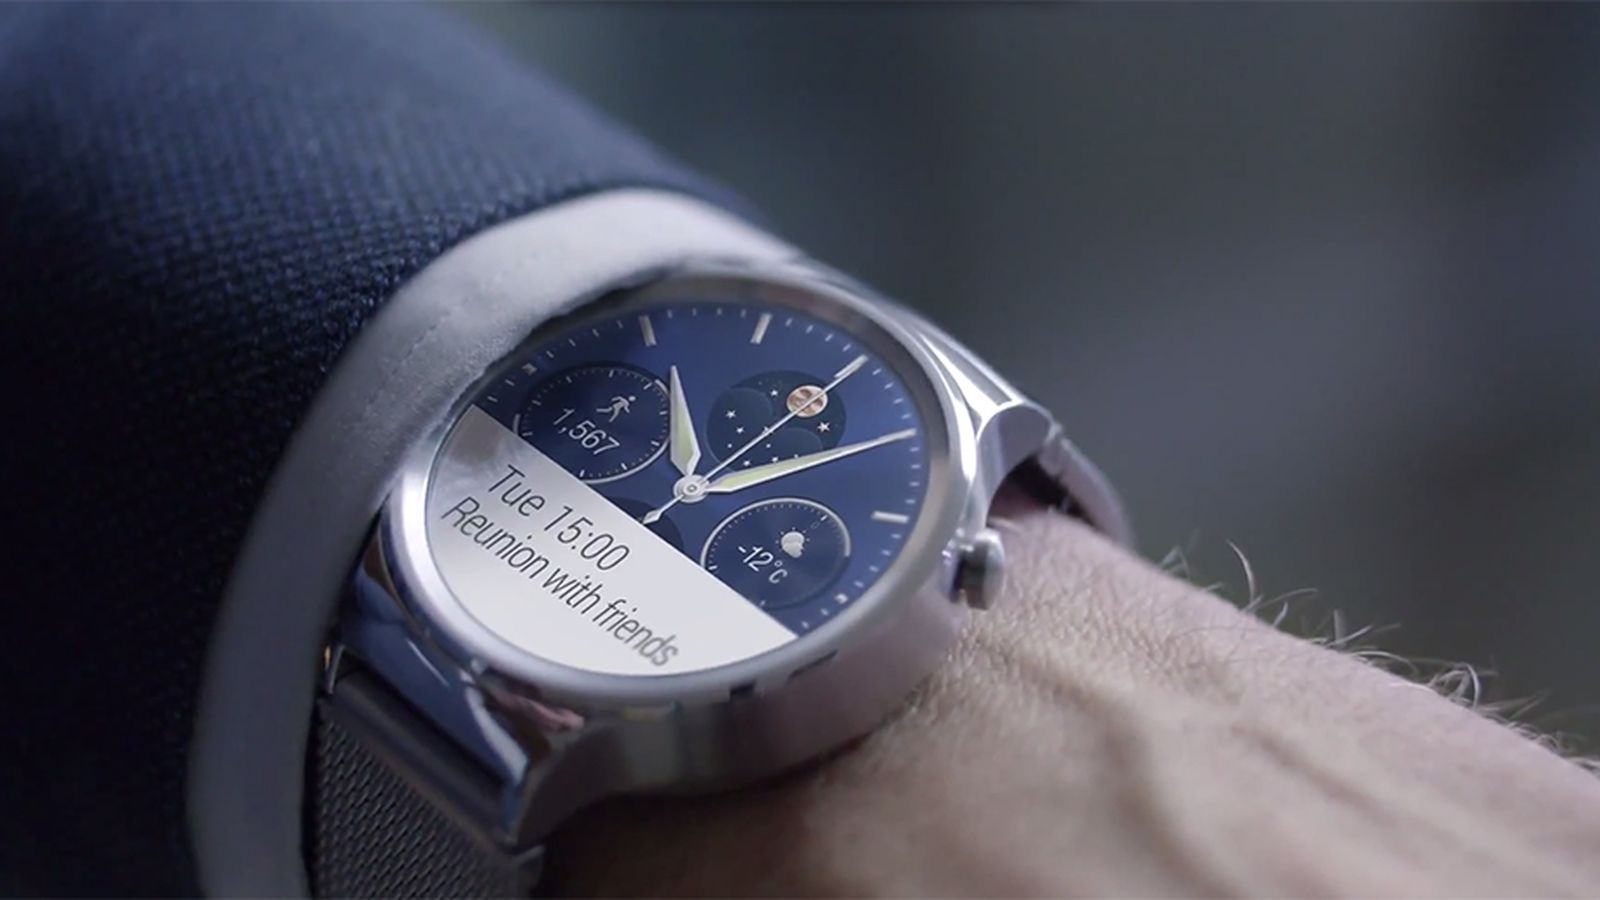 Huawei Watch Android Wear